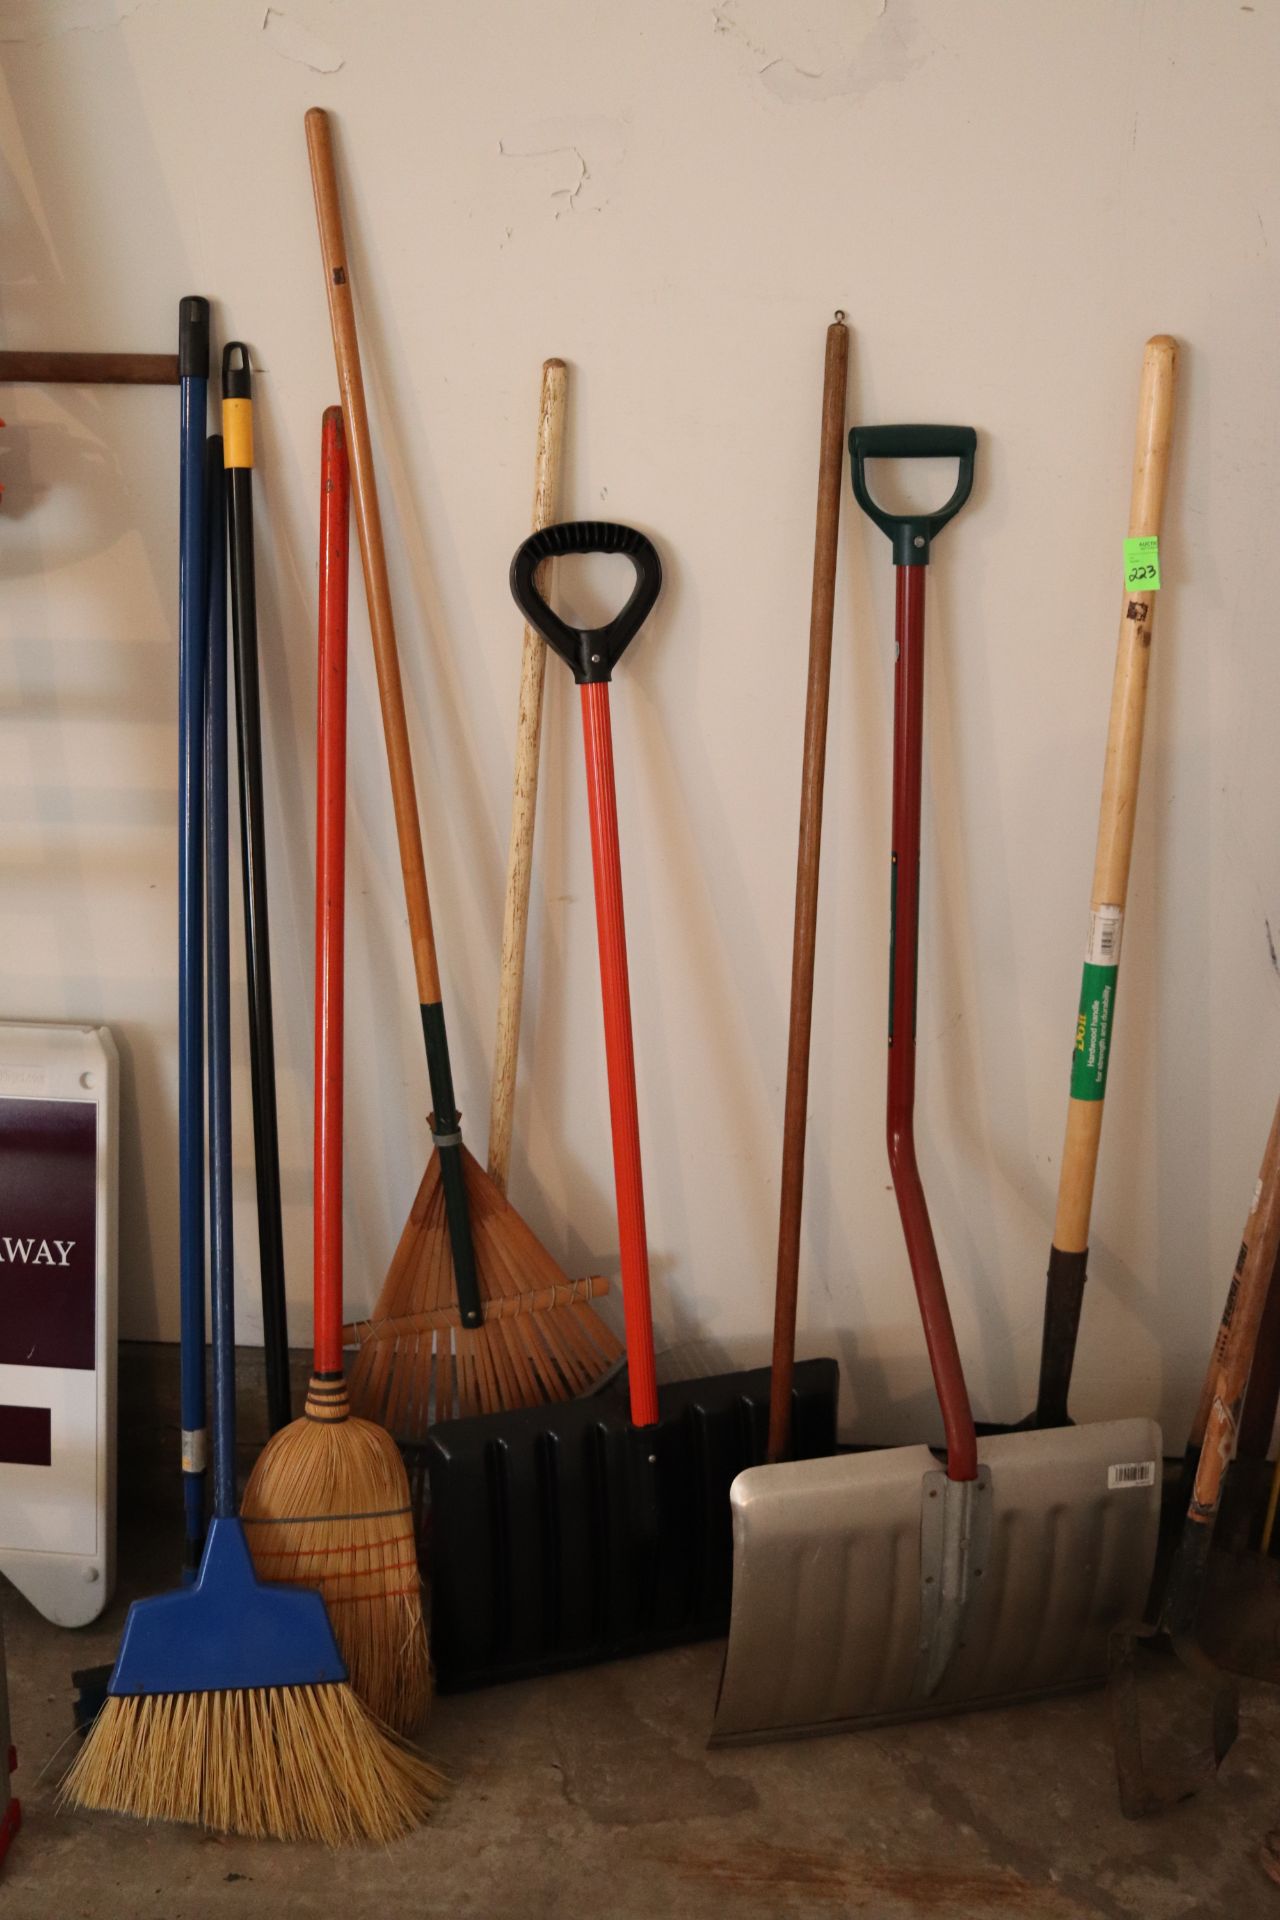 All hand tools pictured including snow shovels, rakes, and spades